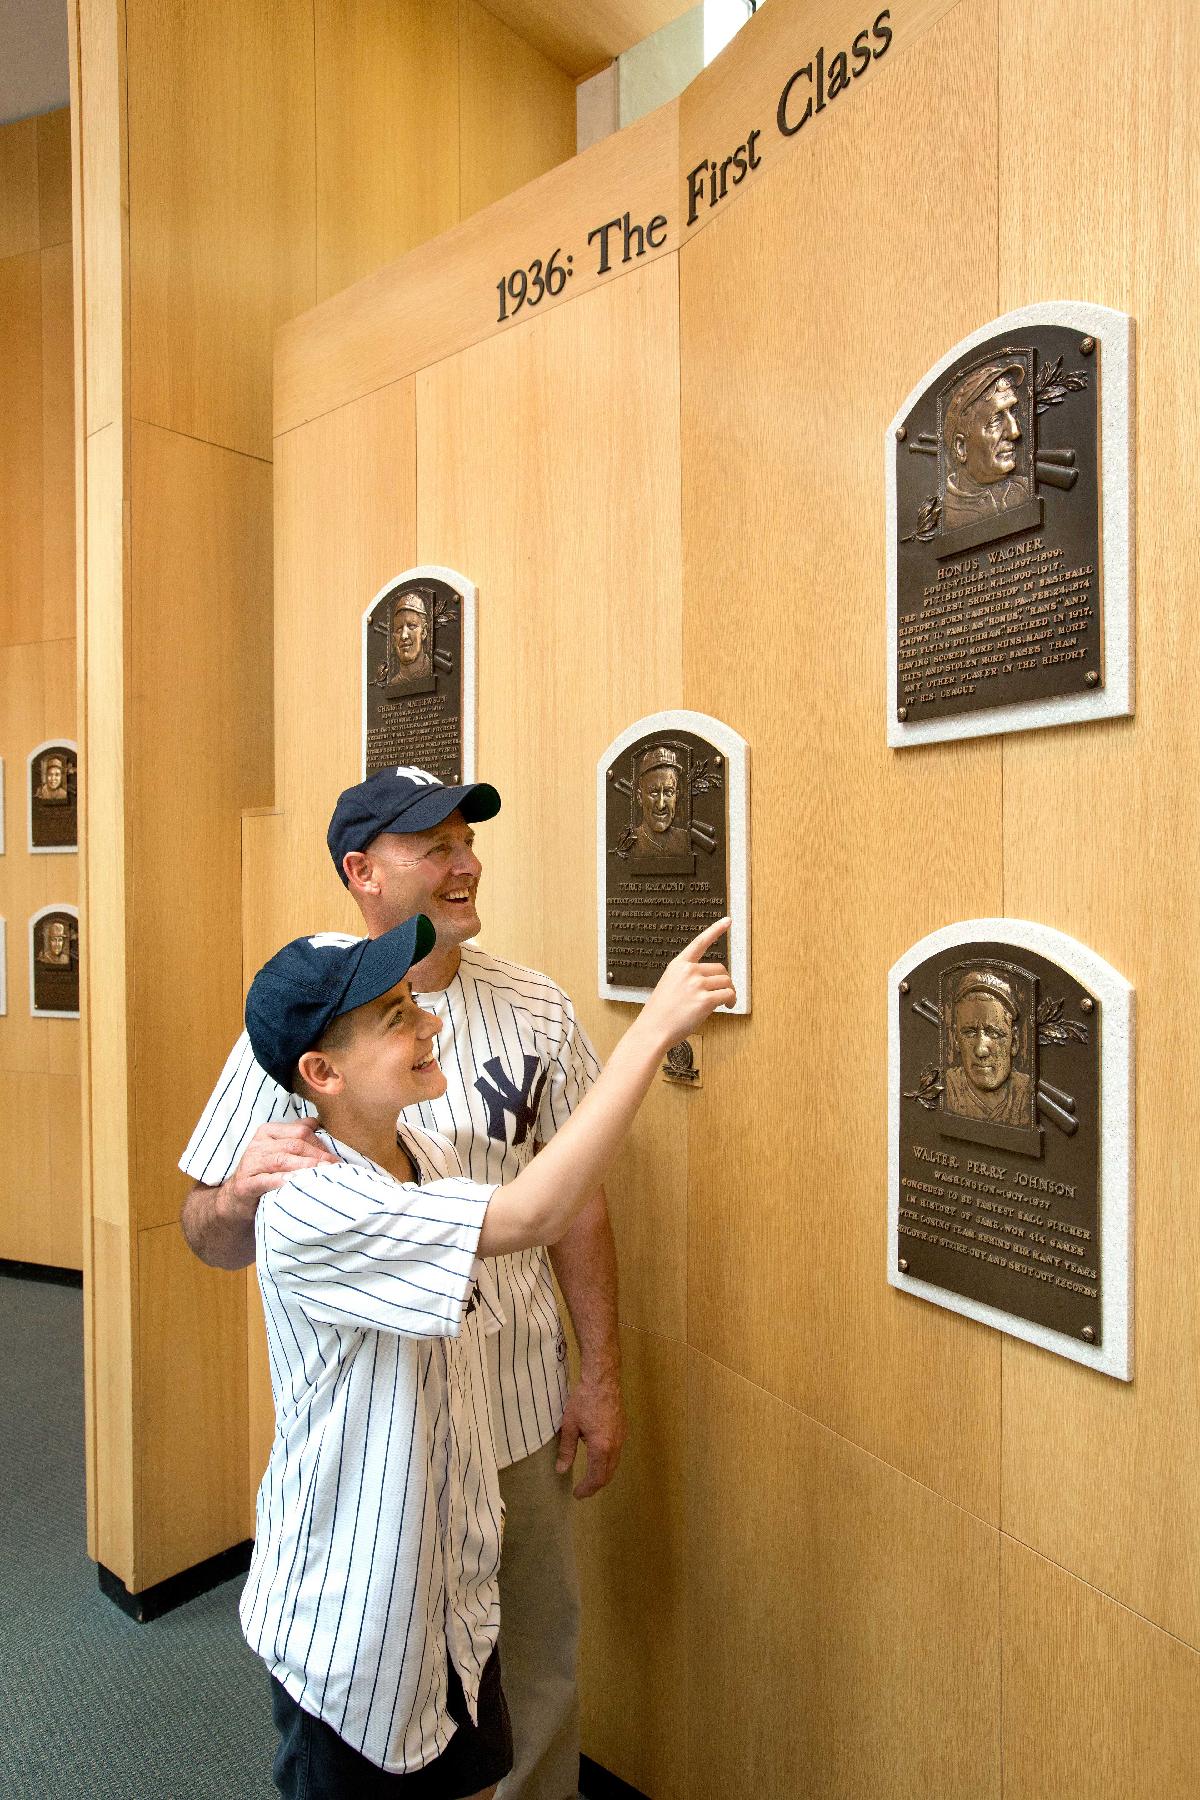 A road trip to Cooperstown, New York, will deliver fans to the National Baseball Hall of Fame and Museum. (Courtesy of the National Baseball Hall of Fame and Museum.)